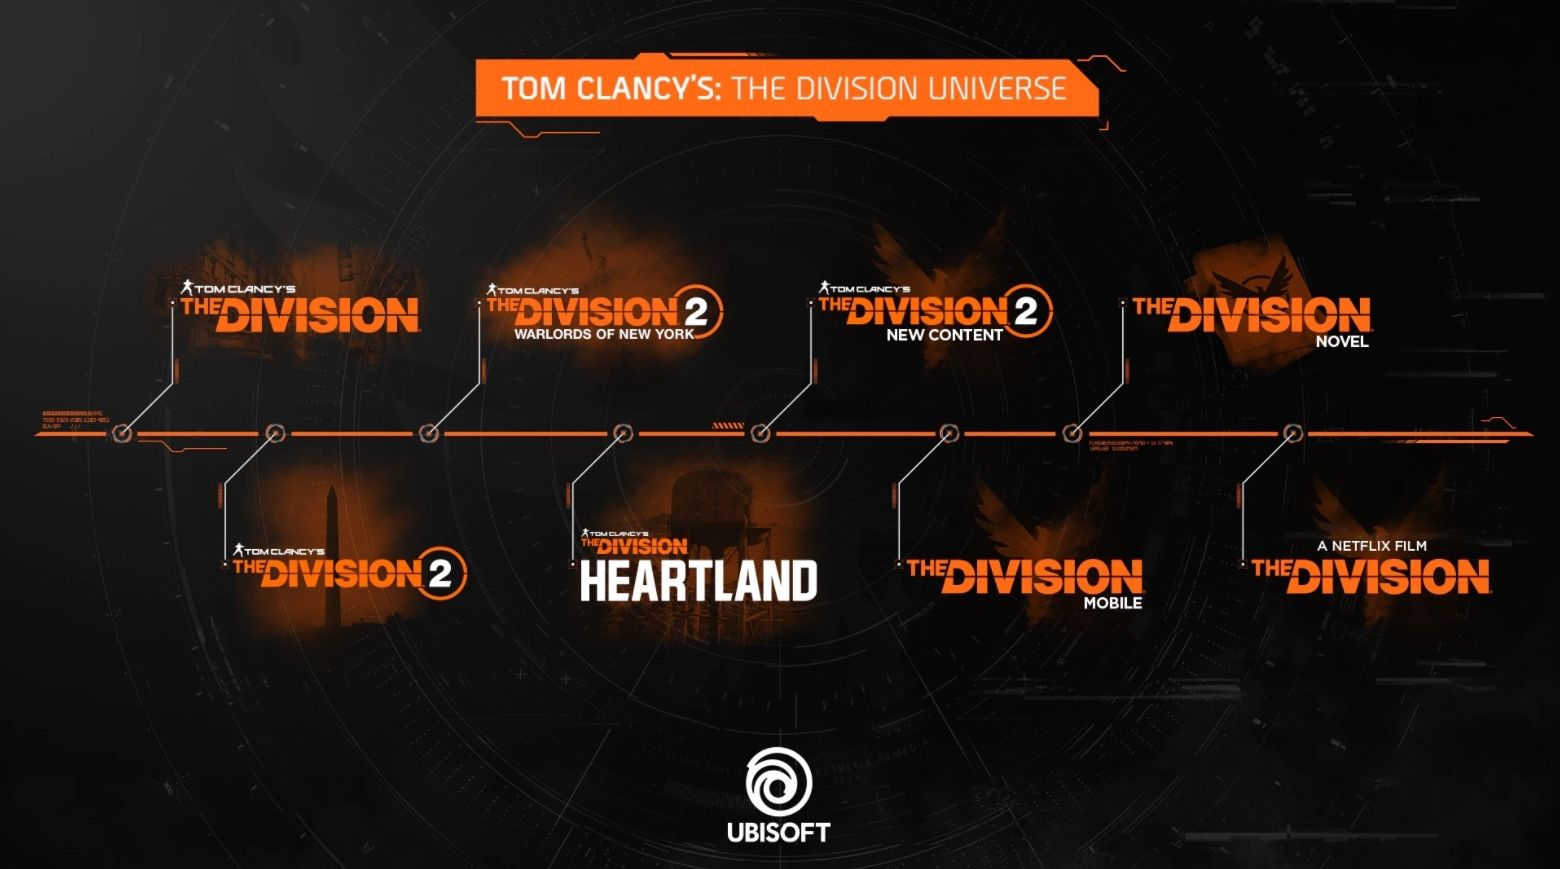 Timeline outlining the Division Universe and their expansion into other media